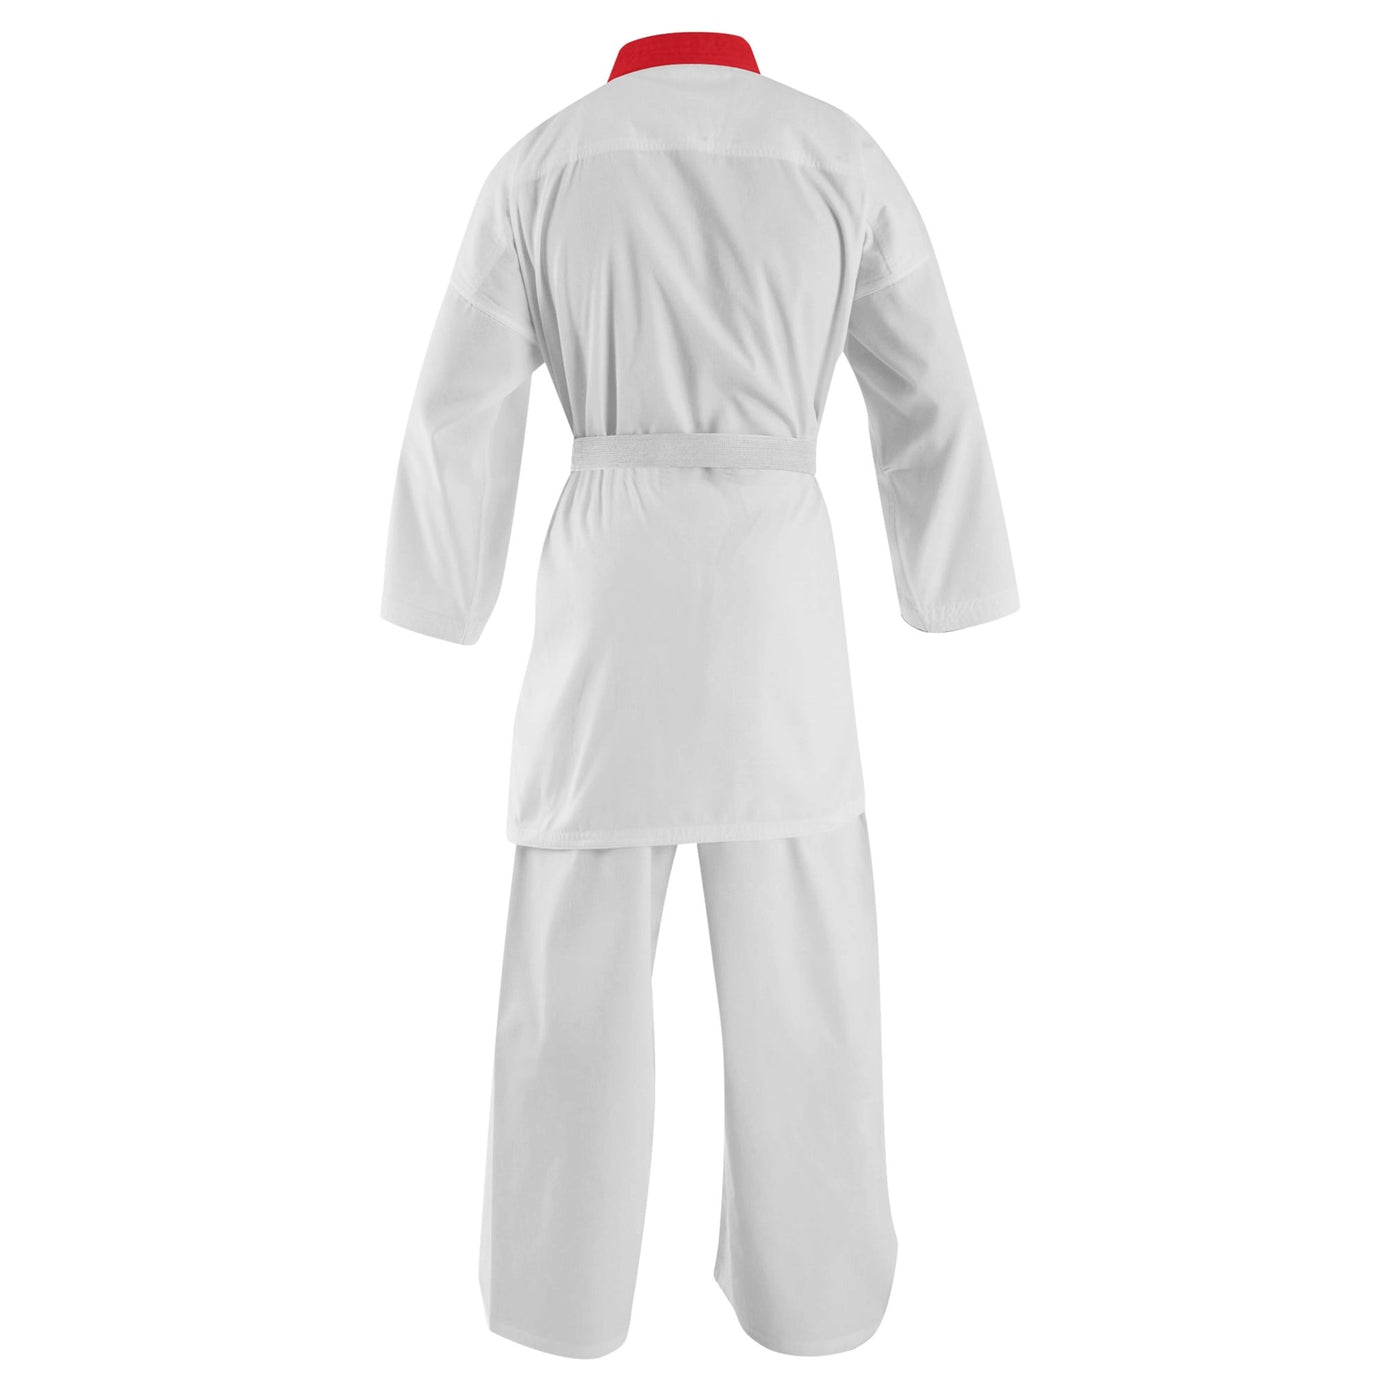 8 oz. Plain White With Red Lapel Light Weight Karate Uniform - Summo Sports